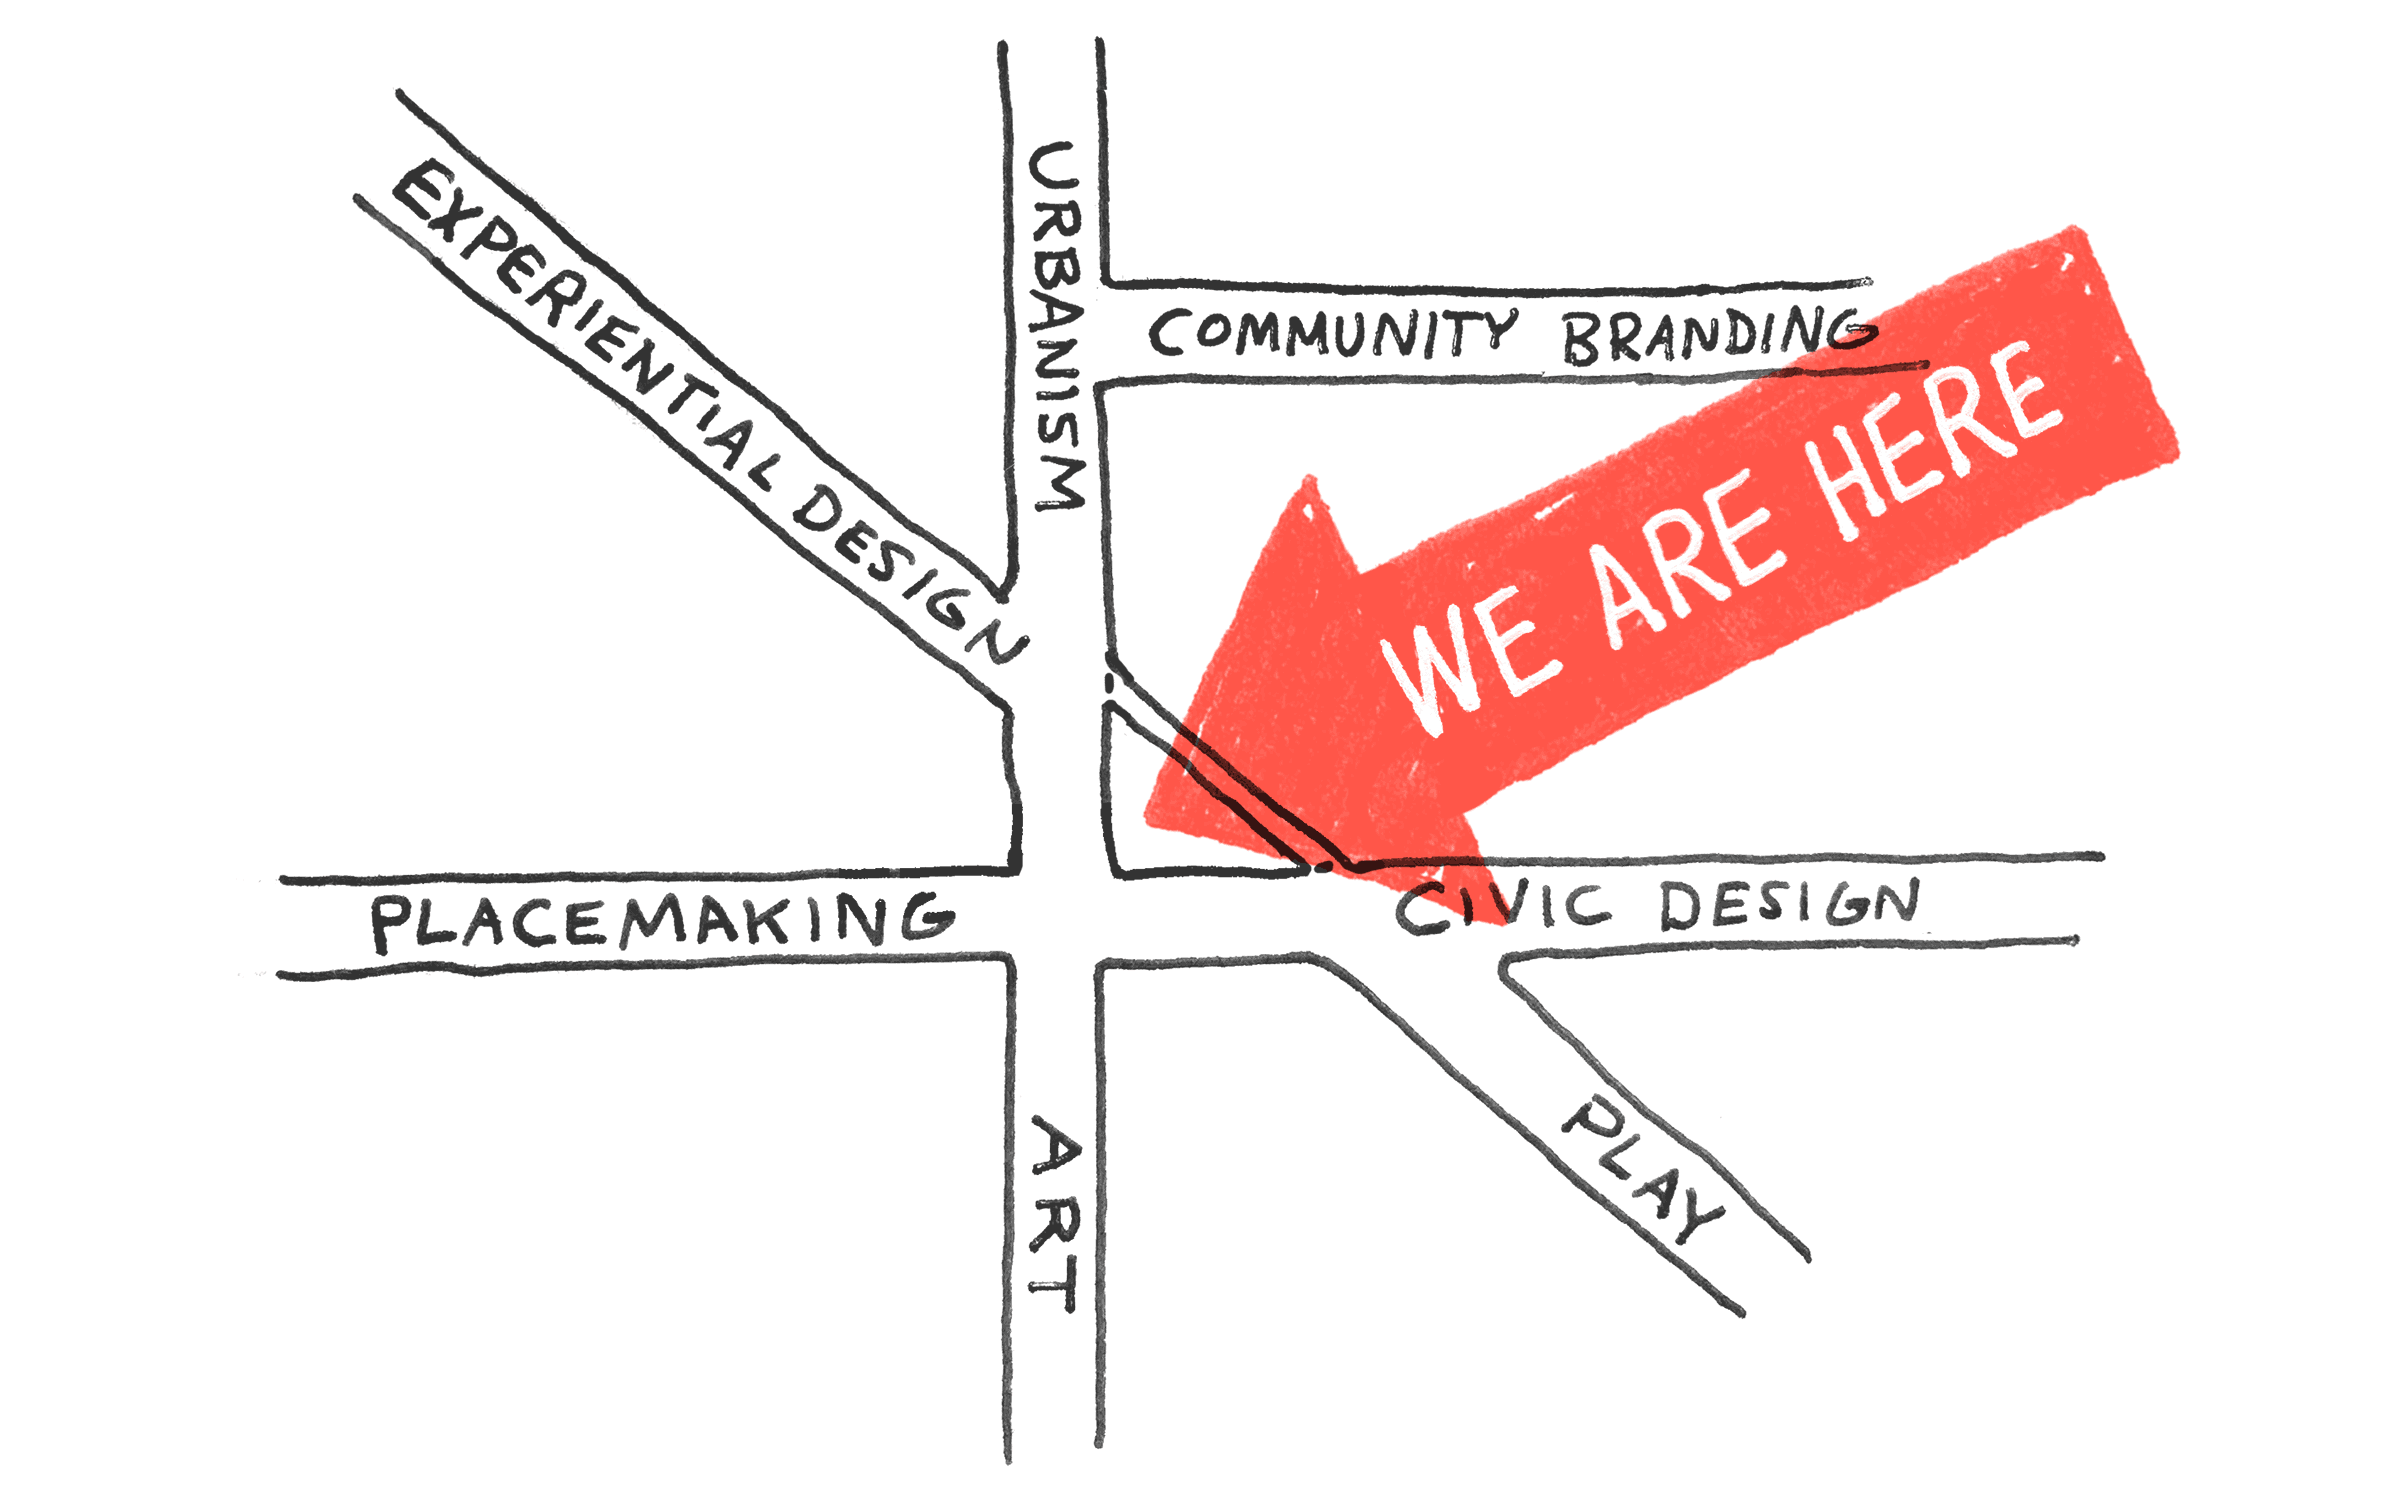 Public Mechanics, We Are Here hand-drawn map with streets labeled experiential design, placemaking, art, urbanism, community branding, civic design, play